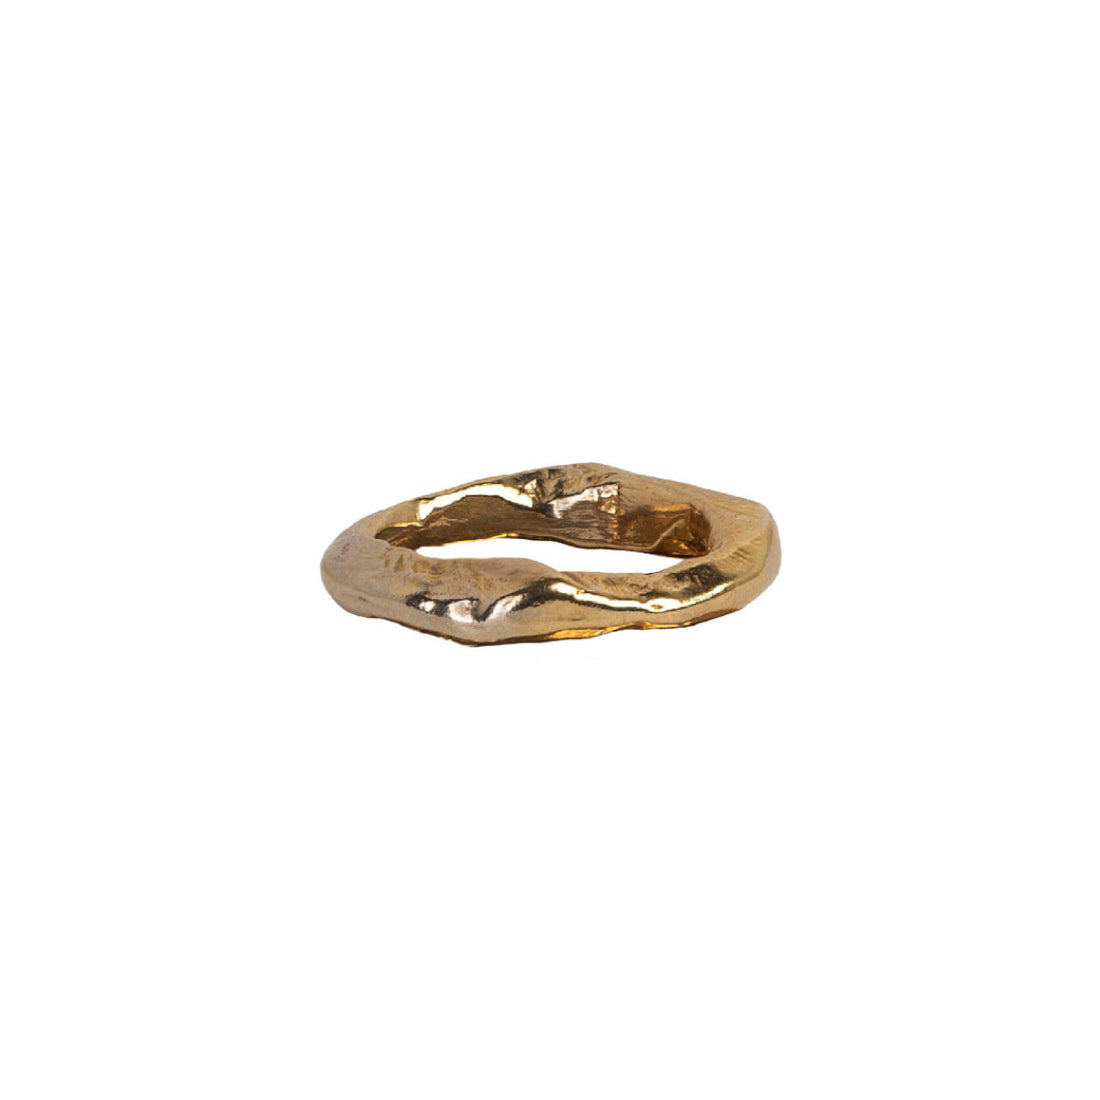 The Element Ring in Bronze is inspired by the organic beauty in nature. Designed with the art of wabi sabi it will express the natural beauty you have within. 